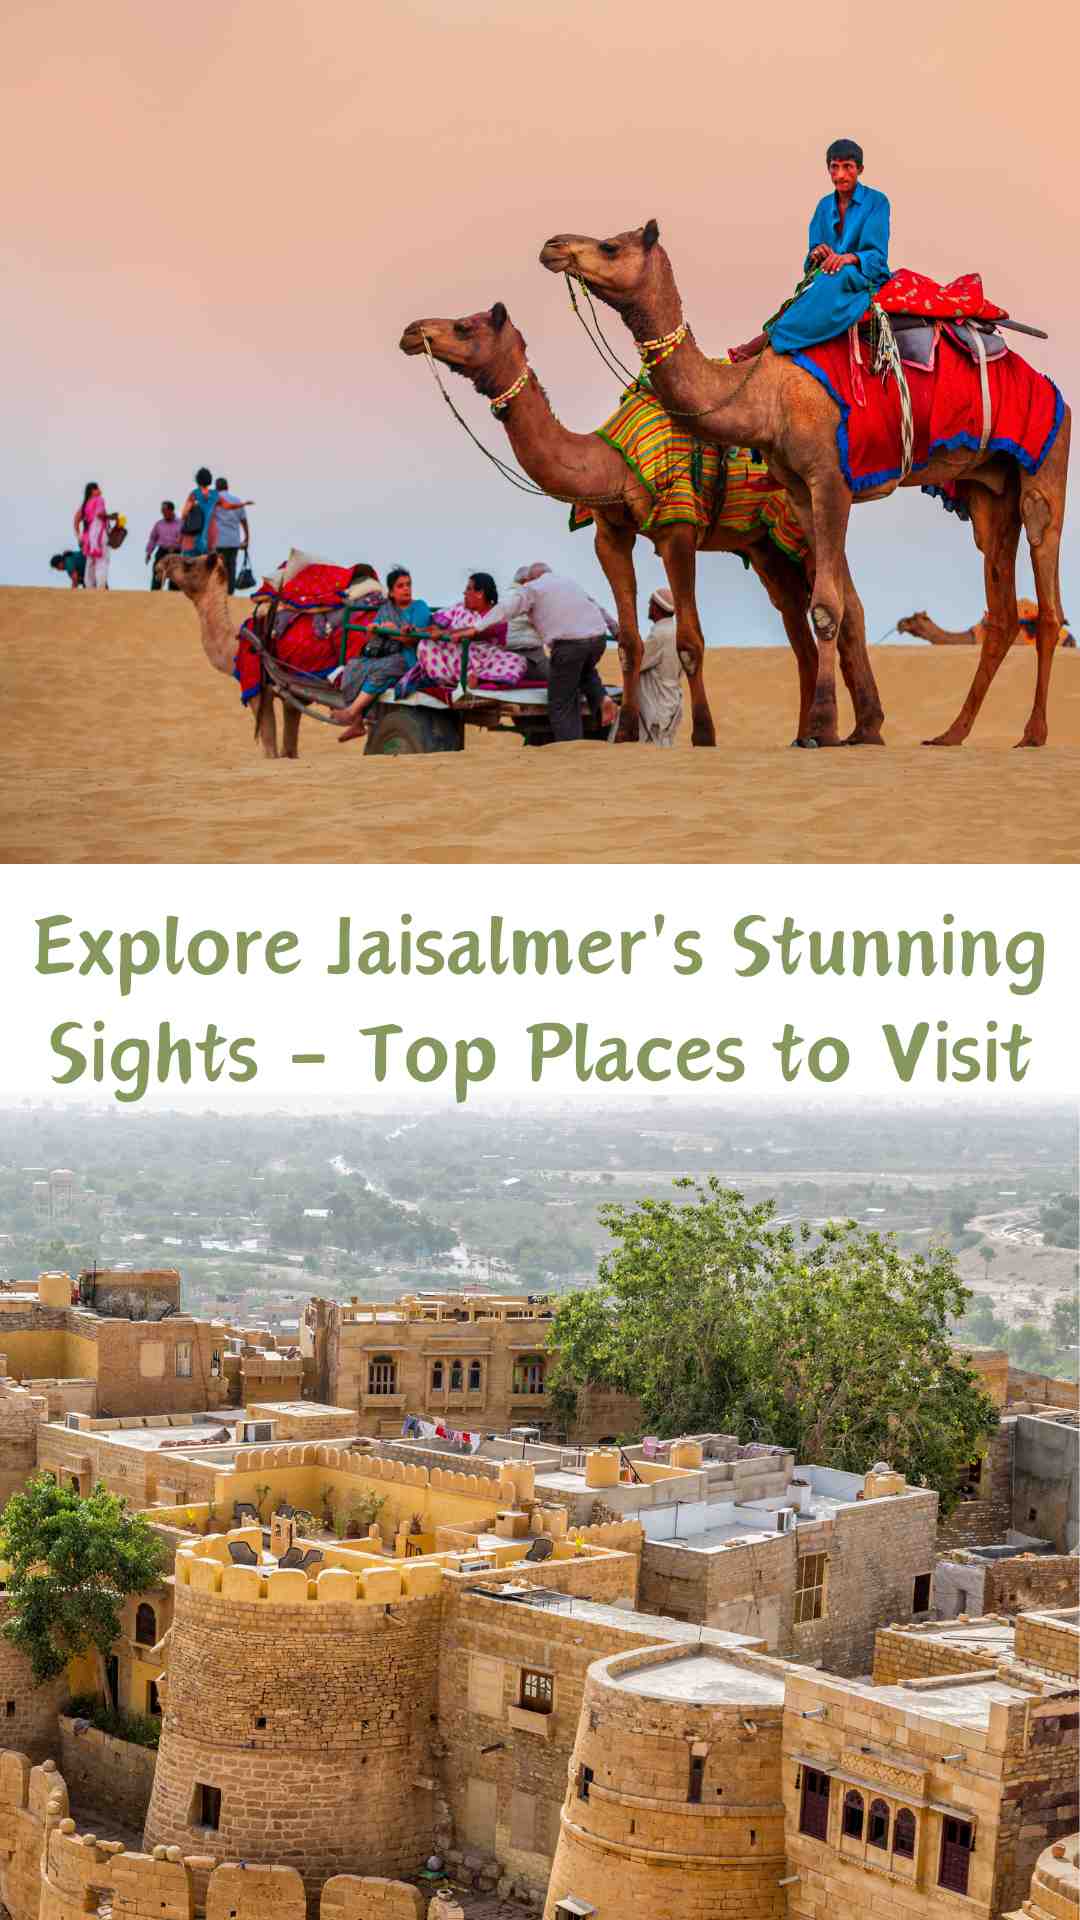 Top Places to Visit in Jaisalmer